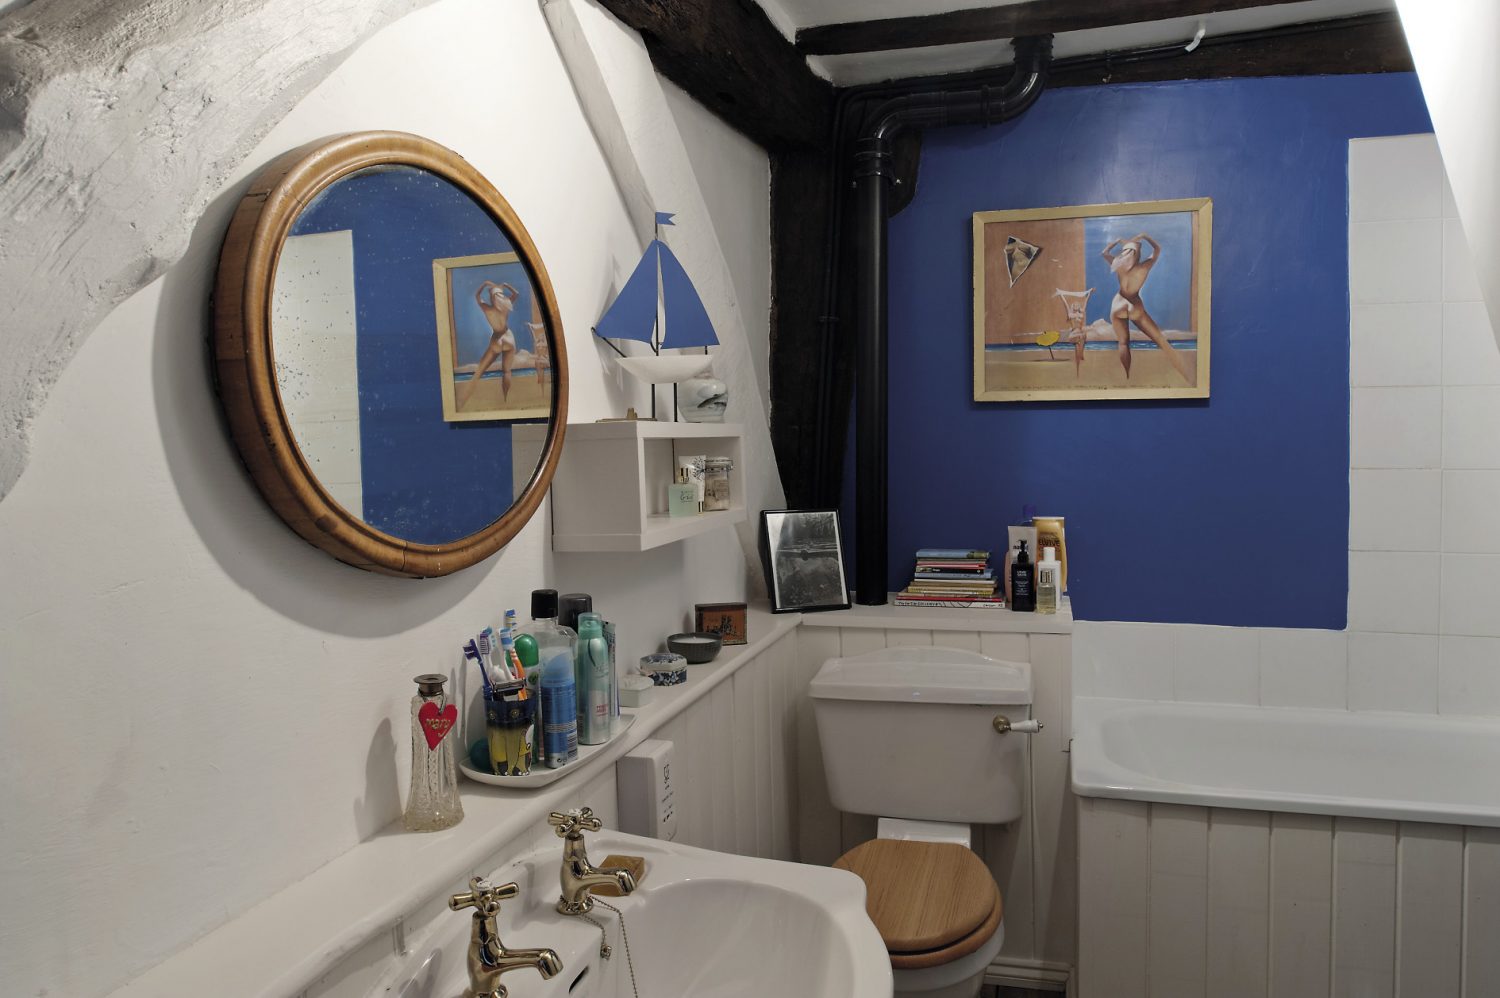 The family bathroom, painted a rich cobalt blue, features artwork collected by David’s father